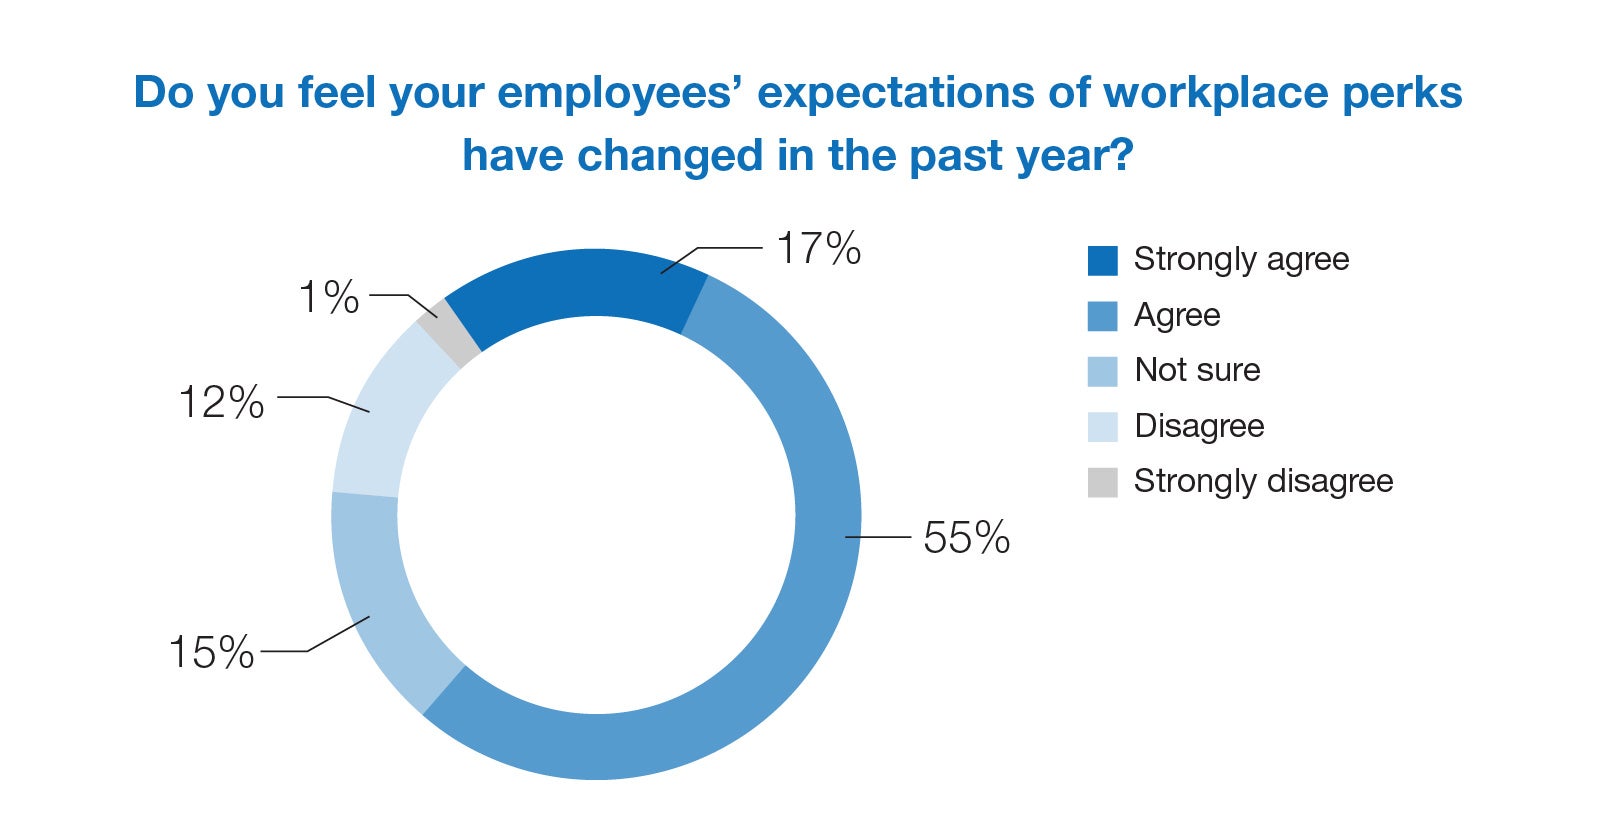 Do you feel your employee's expectations of workplace perks have changed in the past year?